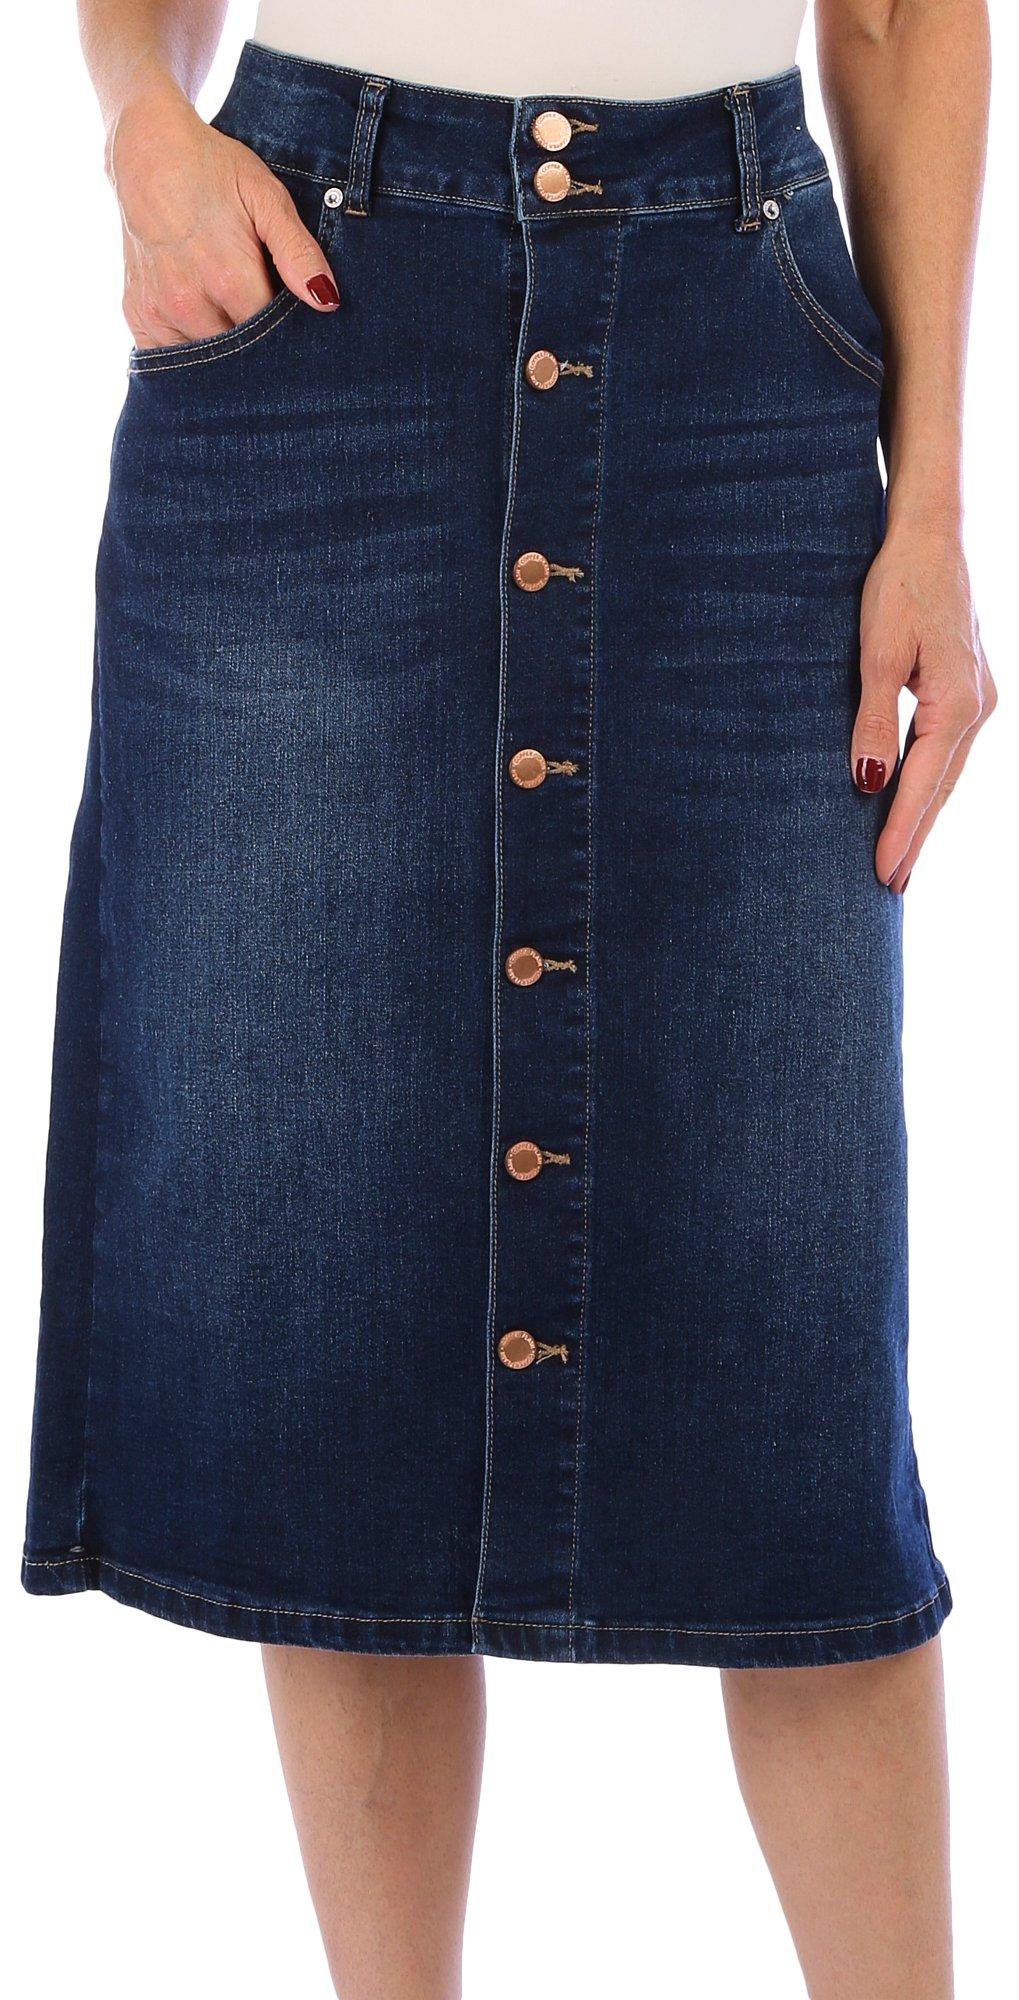 COPPERFLASH Womens Button Front Skirt